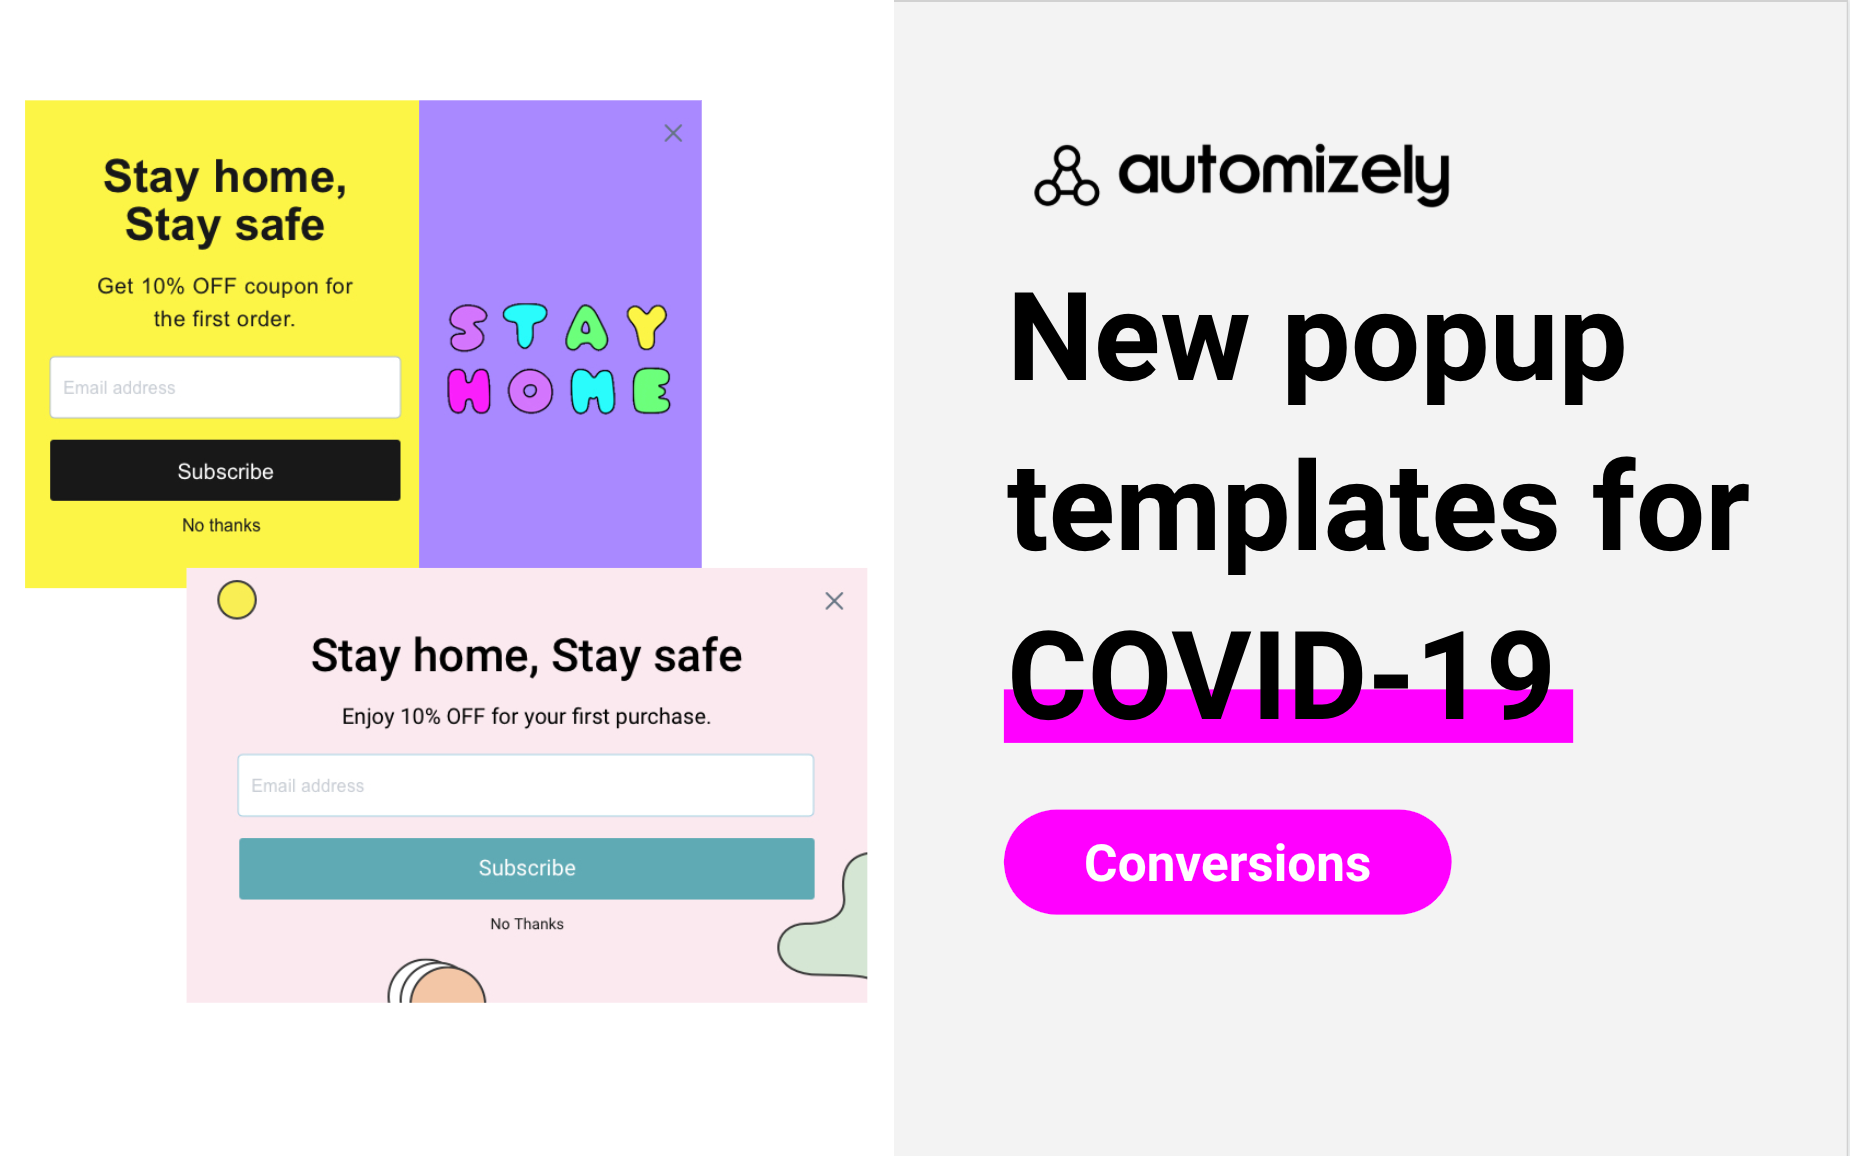 Introducing 10 new free sales popup templates for COVID-19